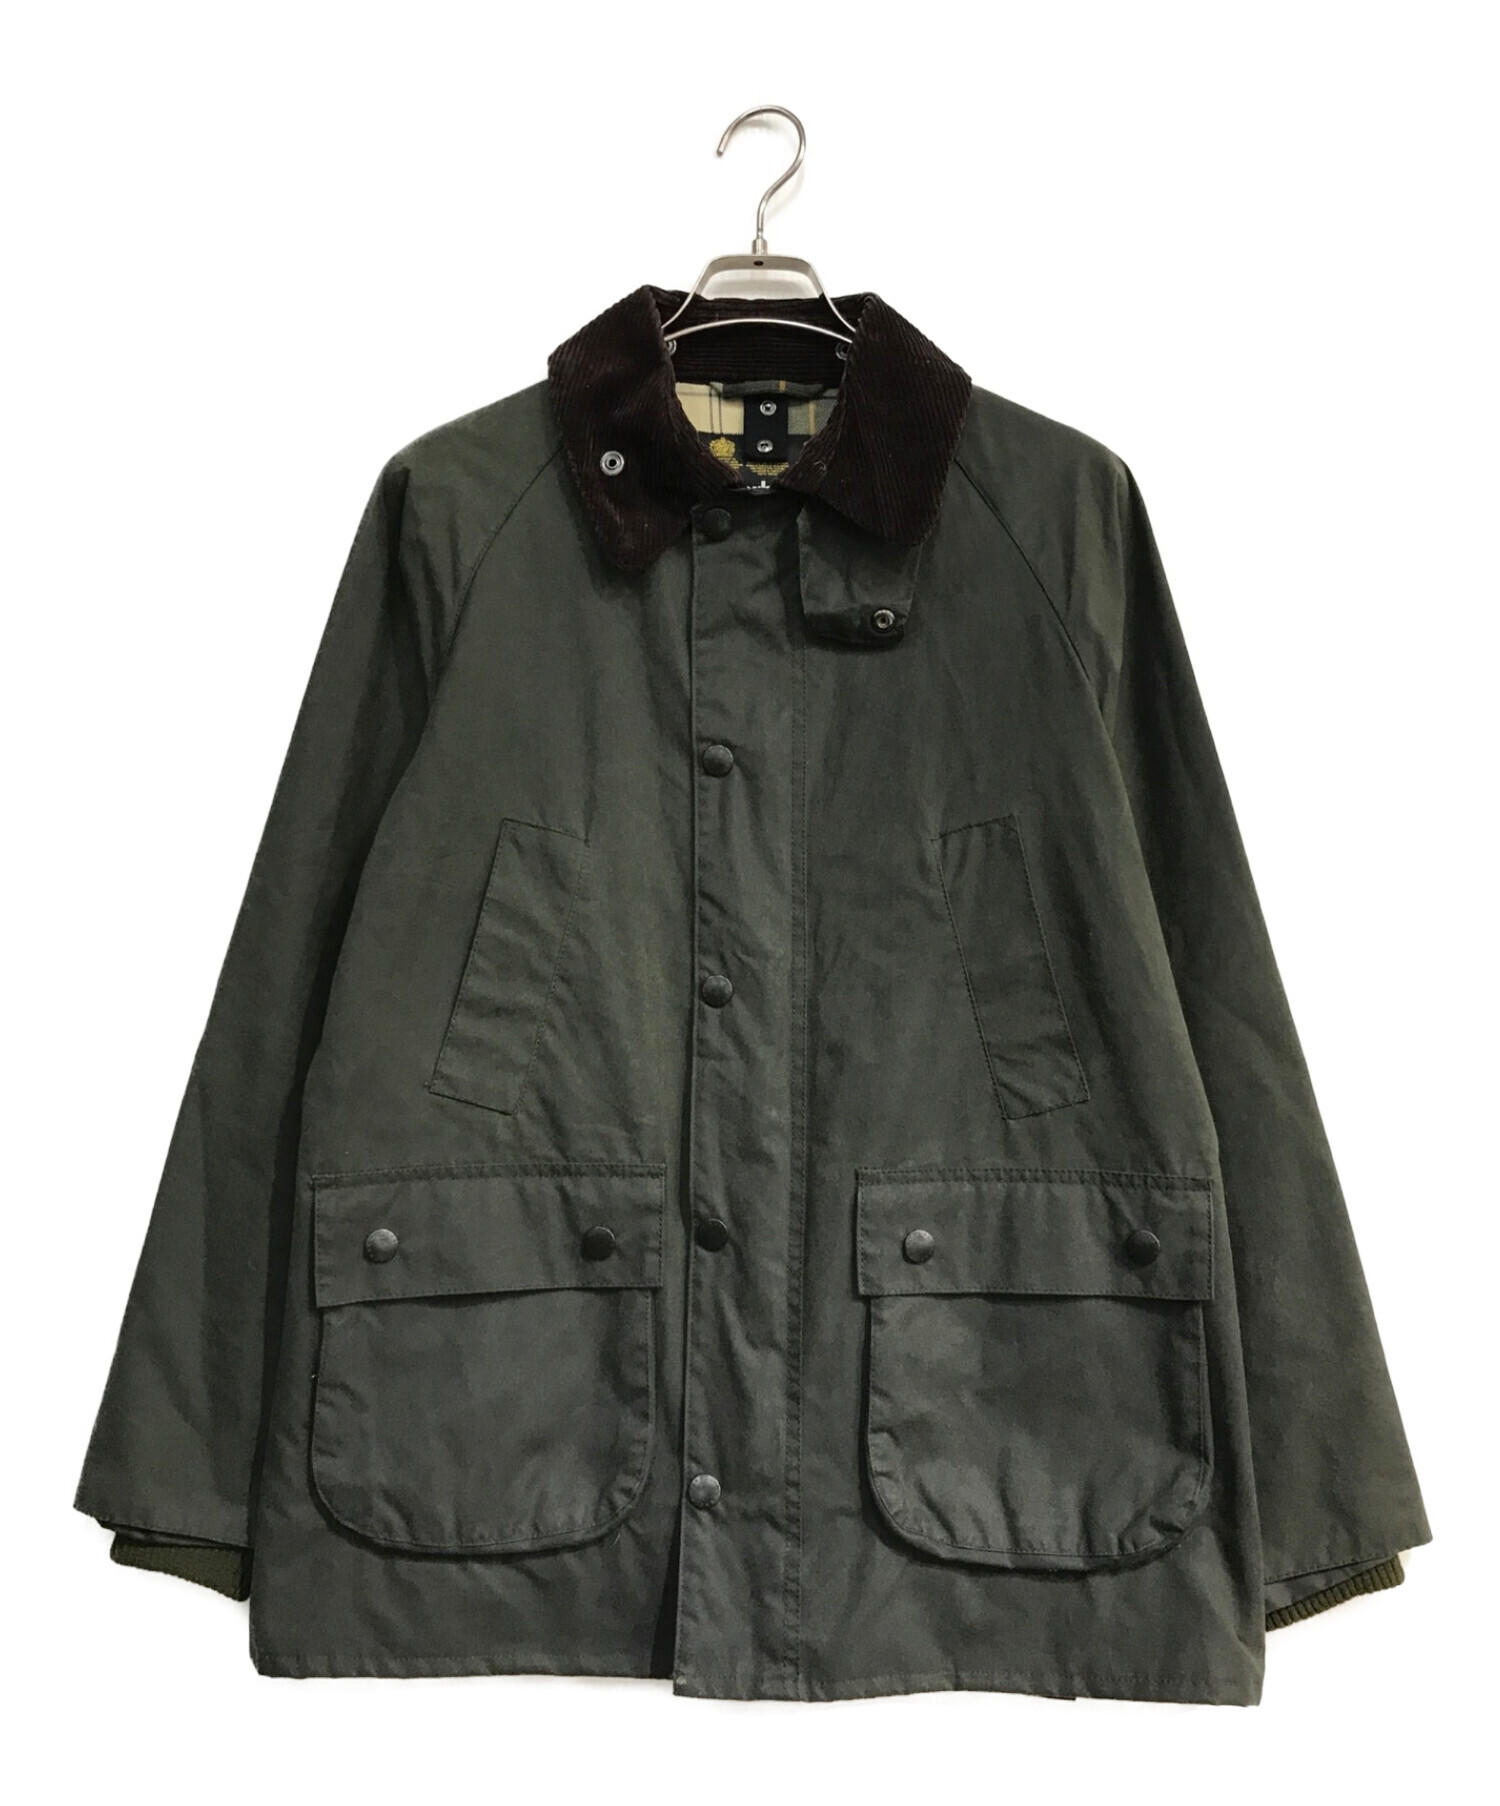 Barbour バブアー 38カーキ BEDALE SL ビデイル | www.darquer.fr